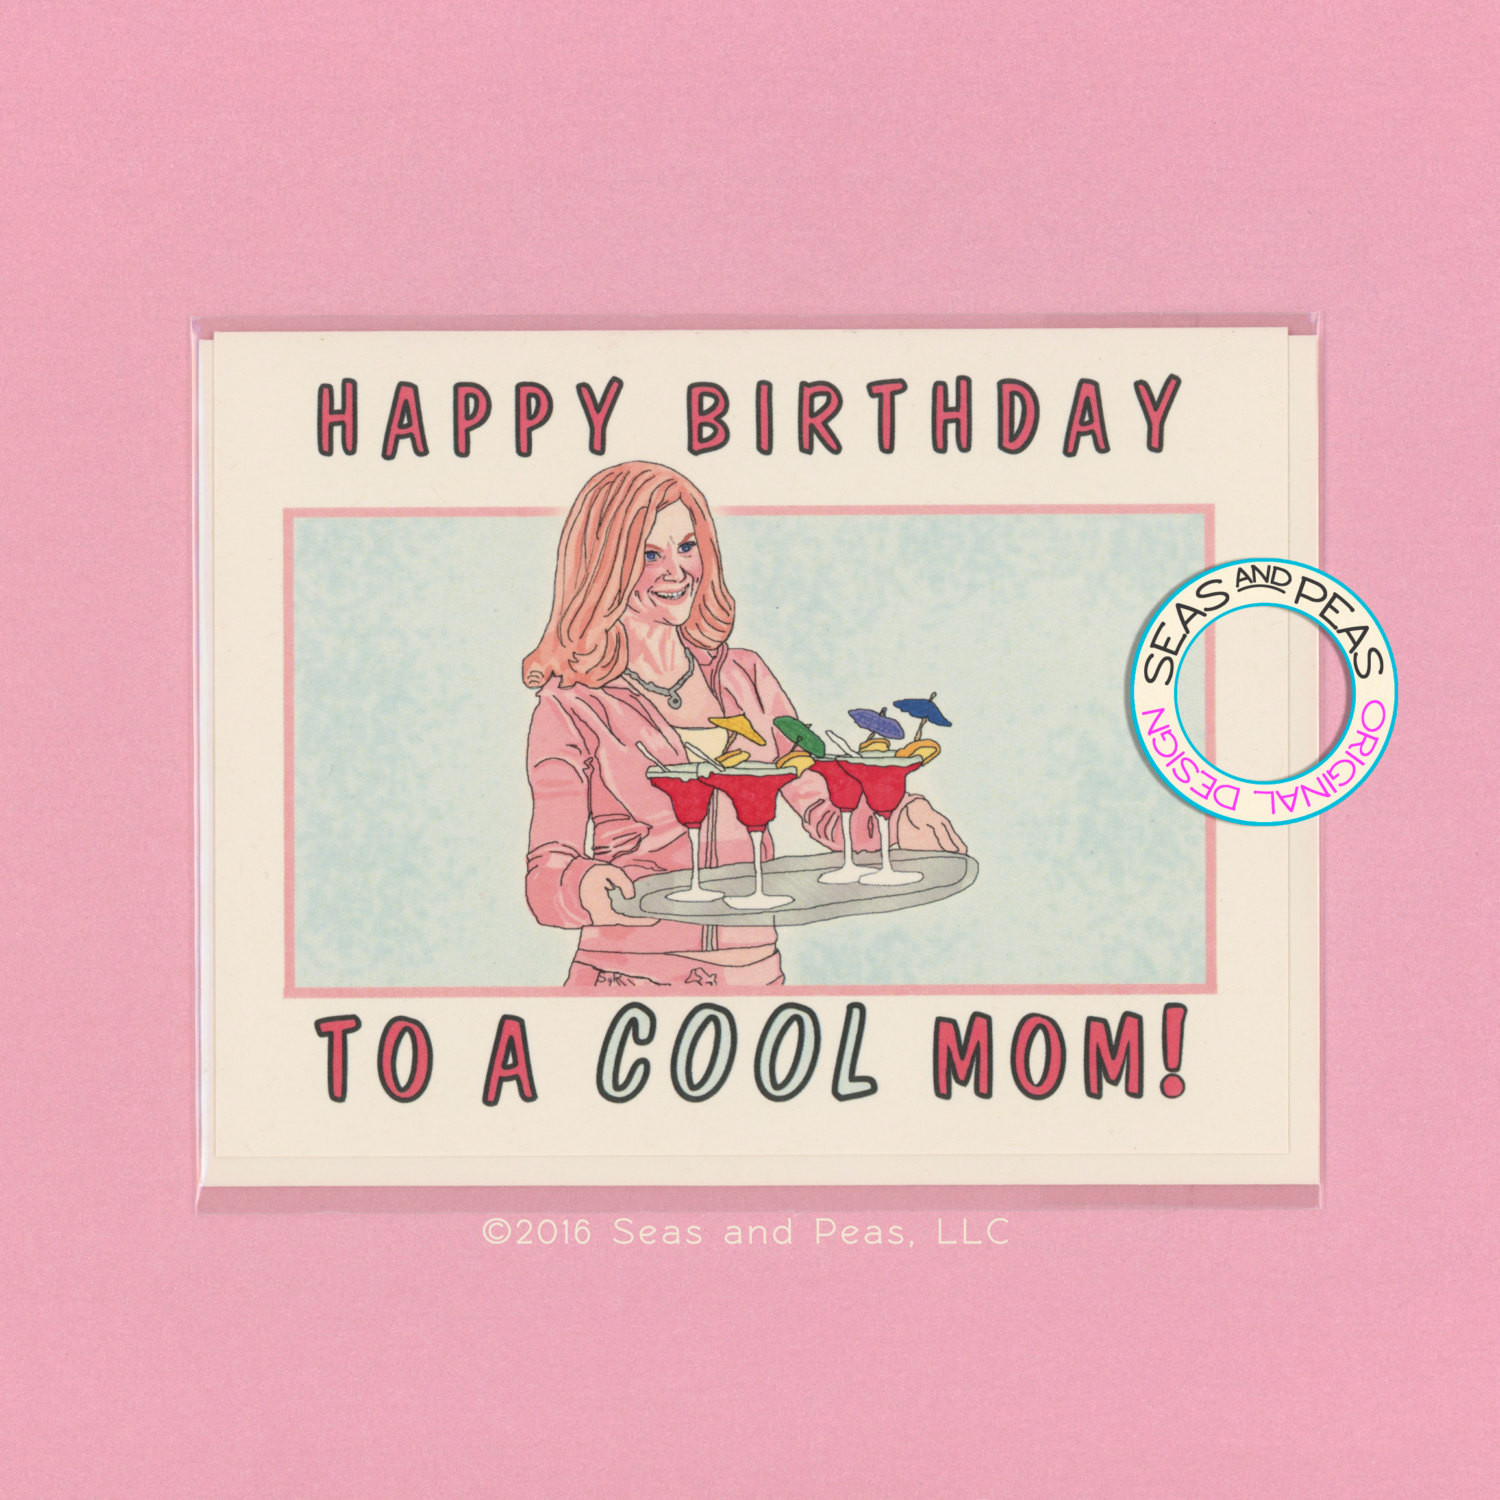 Cool Birthday Cards
 BIRTHDAY For A COOL MOM Funny Birthday Card Mean Girls